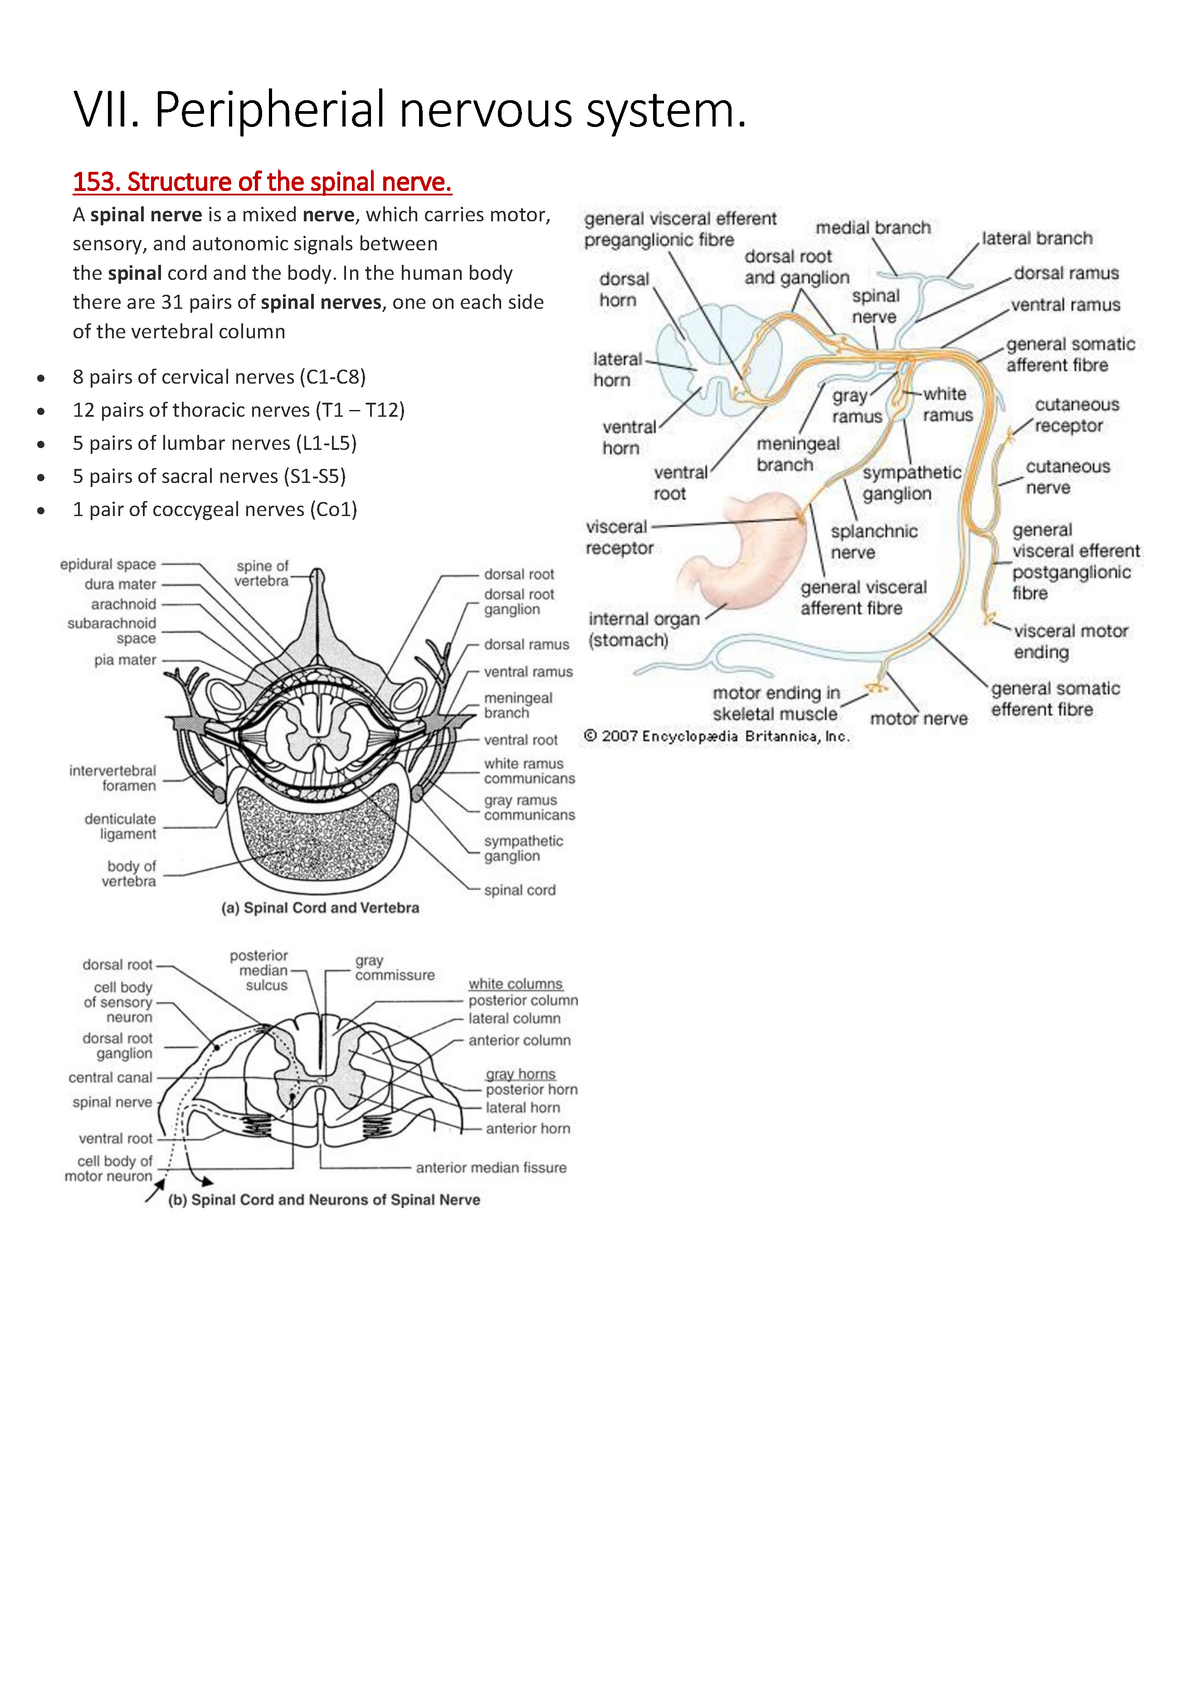 VII. Peripheral nervous system DONE VII Peripherial nervous system 153